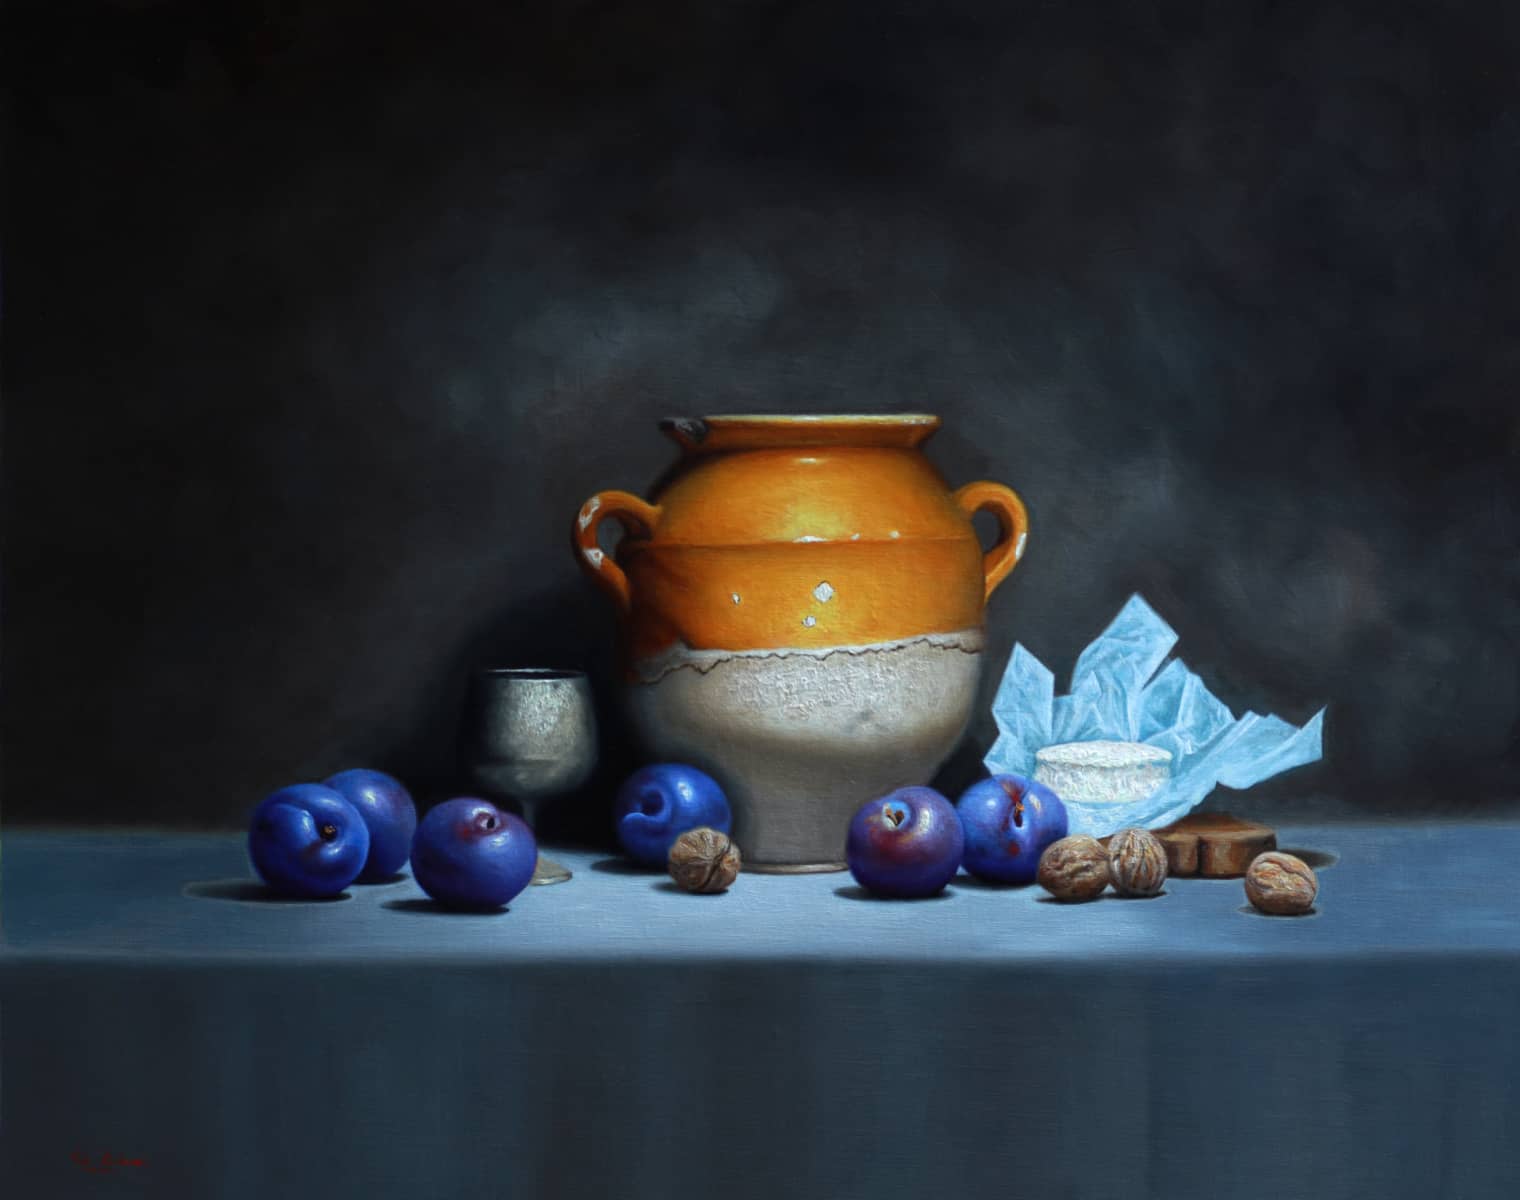 Vicki Sullivan Painting ~ 'French Yellow Confit Pot with Plums' - Curate Art & Design Gallery Sorrento Mornington Peninsula Melbourne